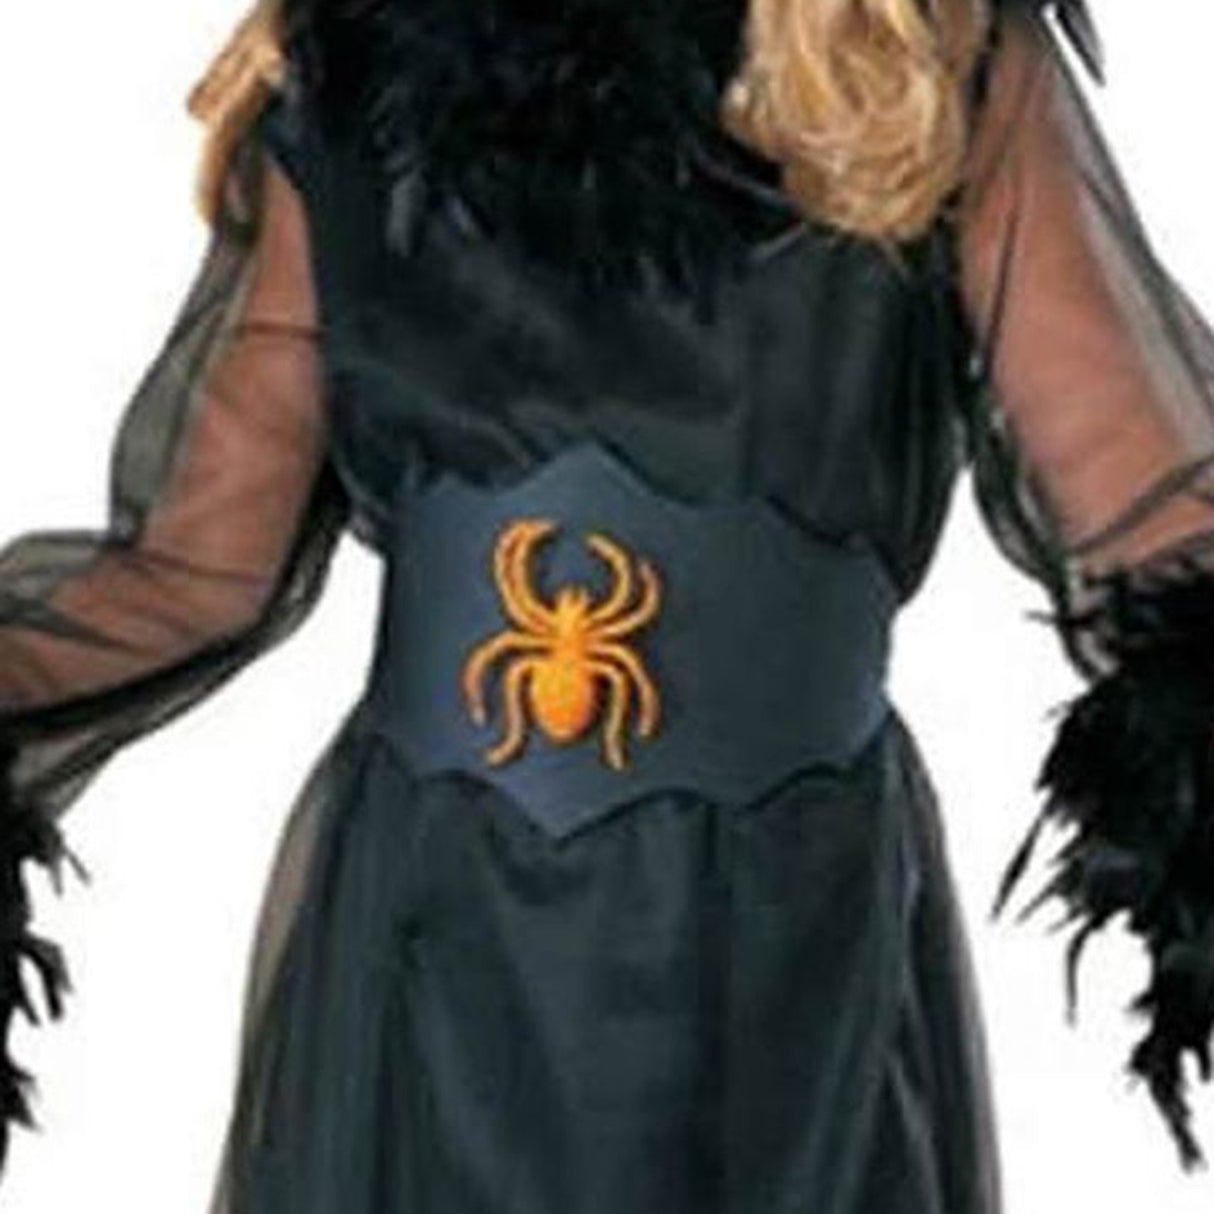 Rubies Pretty Feathered Witch Costume, Black (3-4 years)